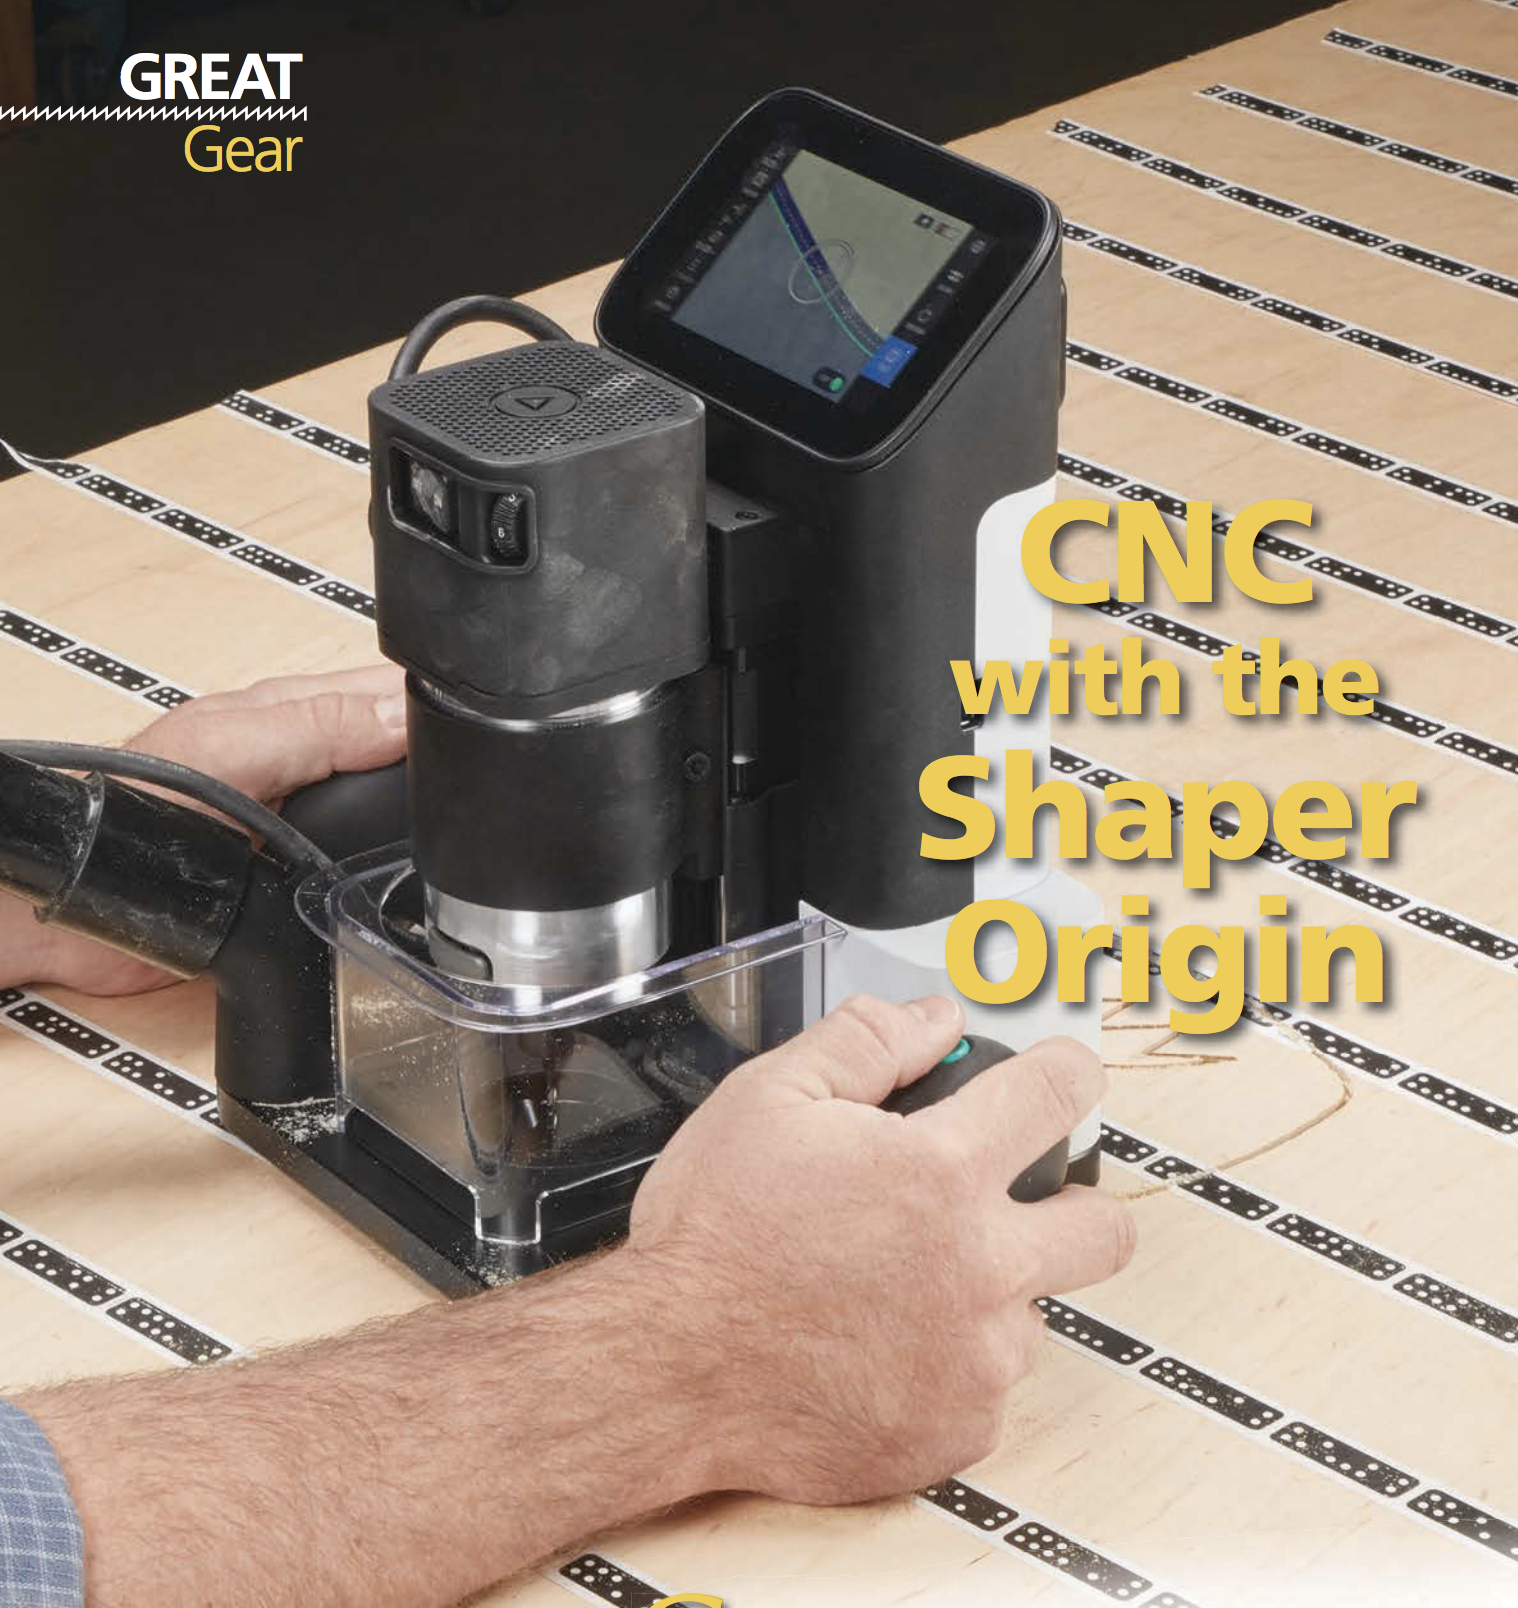 Shaper Origin: The Powerful and Versatile CNC Router for